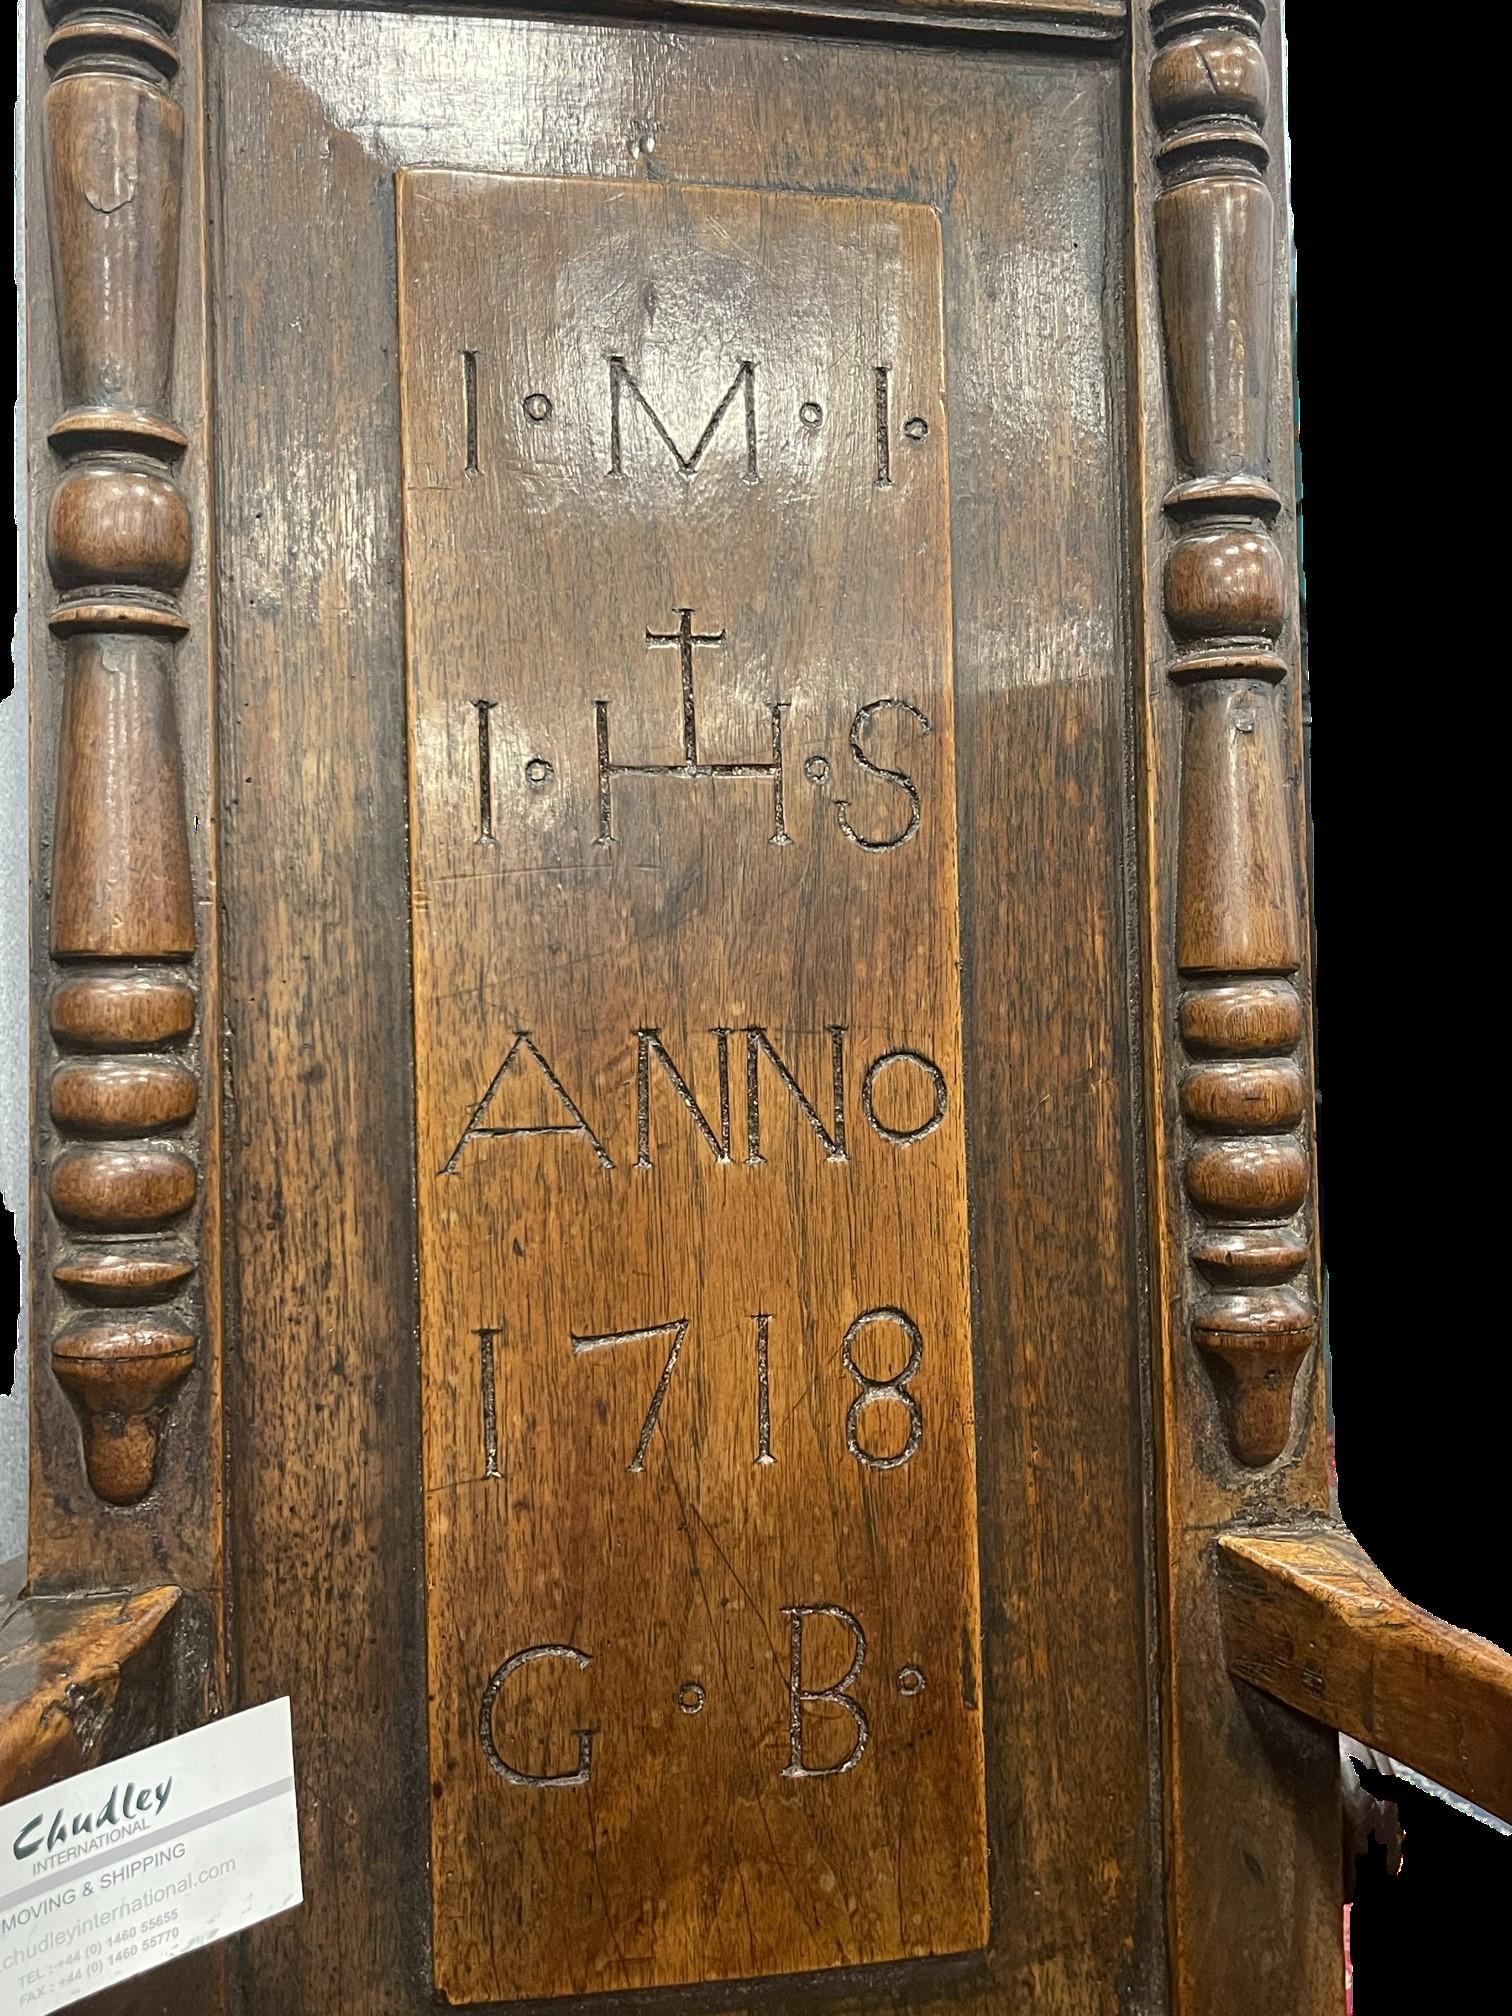 An exceptional example of an early and rare caquetoire chair with carved cresting over an unusually narrow back, inscribed ‘I.M.I., I.H.S., ANNO 1718, G.B.’, with large outward scrolling arms, on block turned supports, joined by peripheral